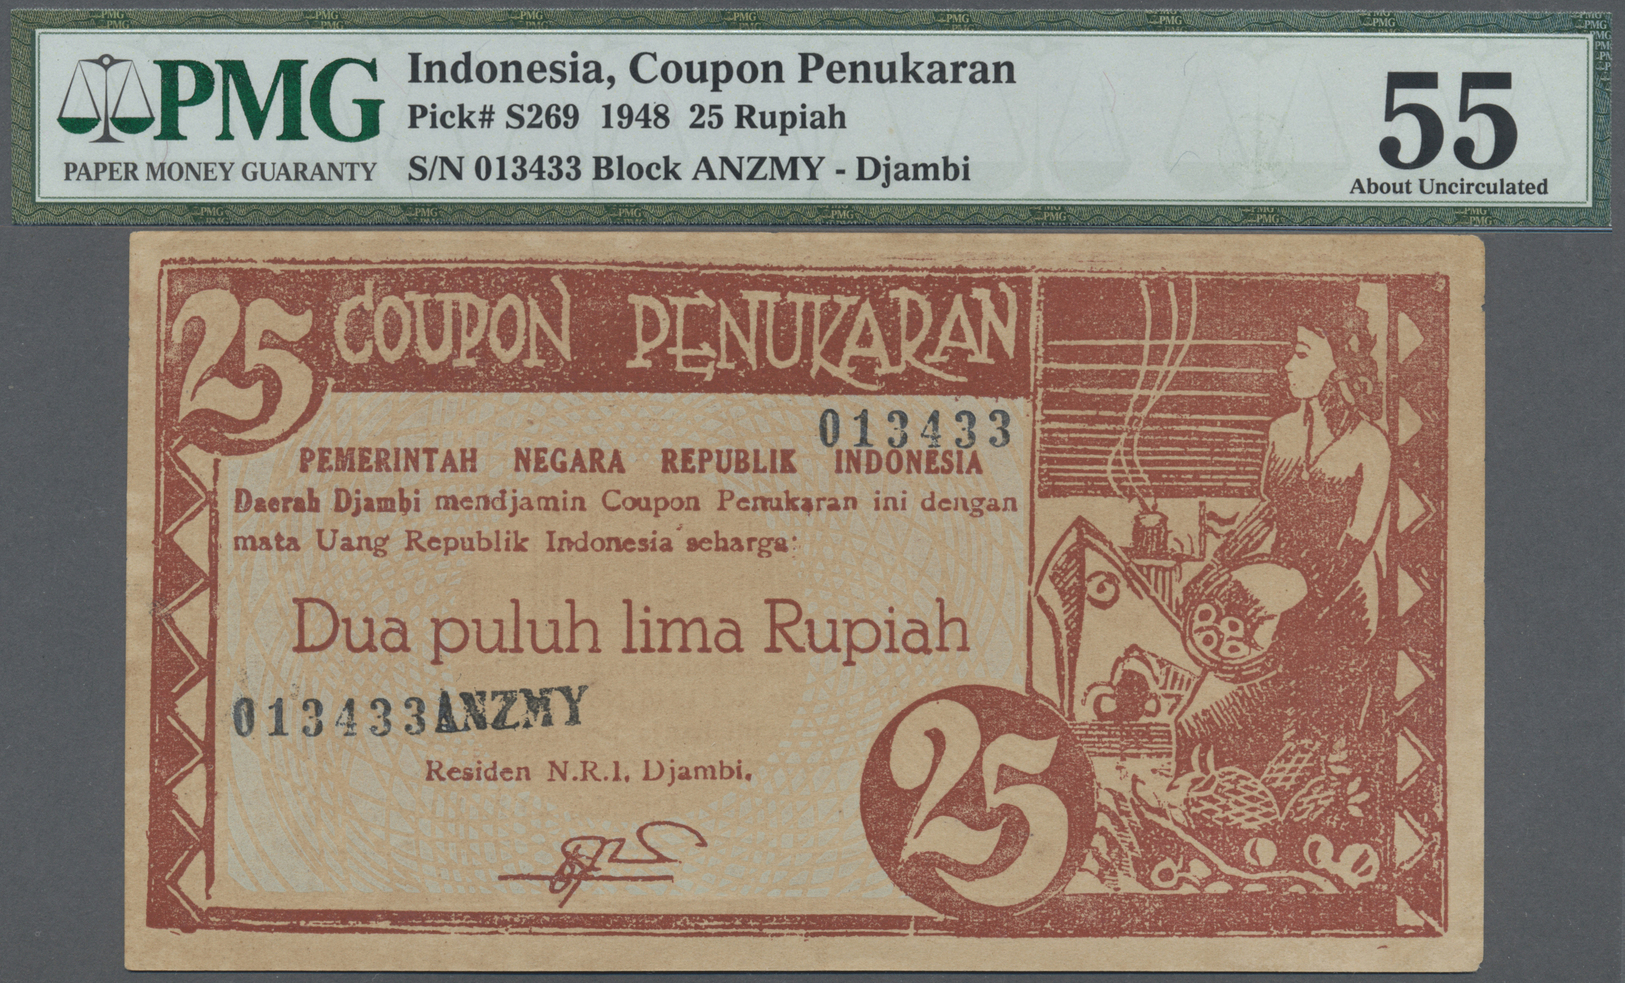 01201 Indonesia / Indonesien: 25 Rupiah 1948 "Coupon Penukaran" Issue, P.S269 With Minor Edge Damages, PMG Graded 55 Abo - Indonesia